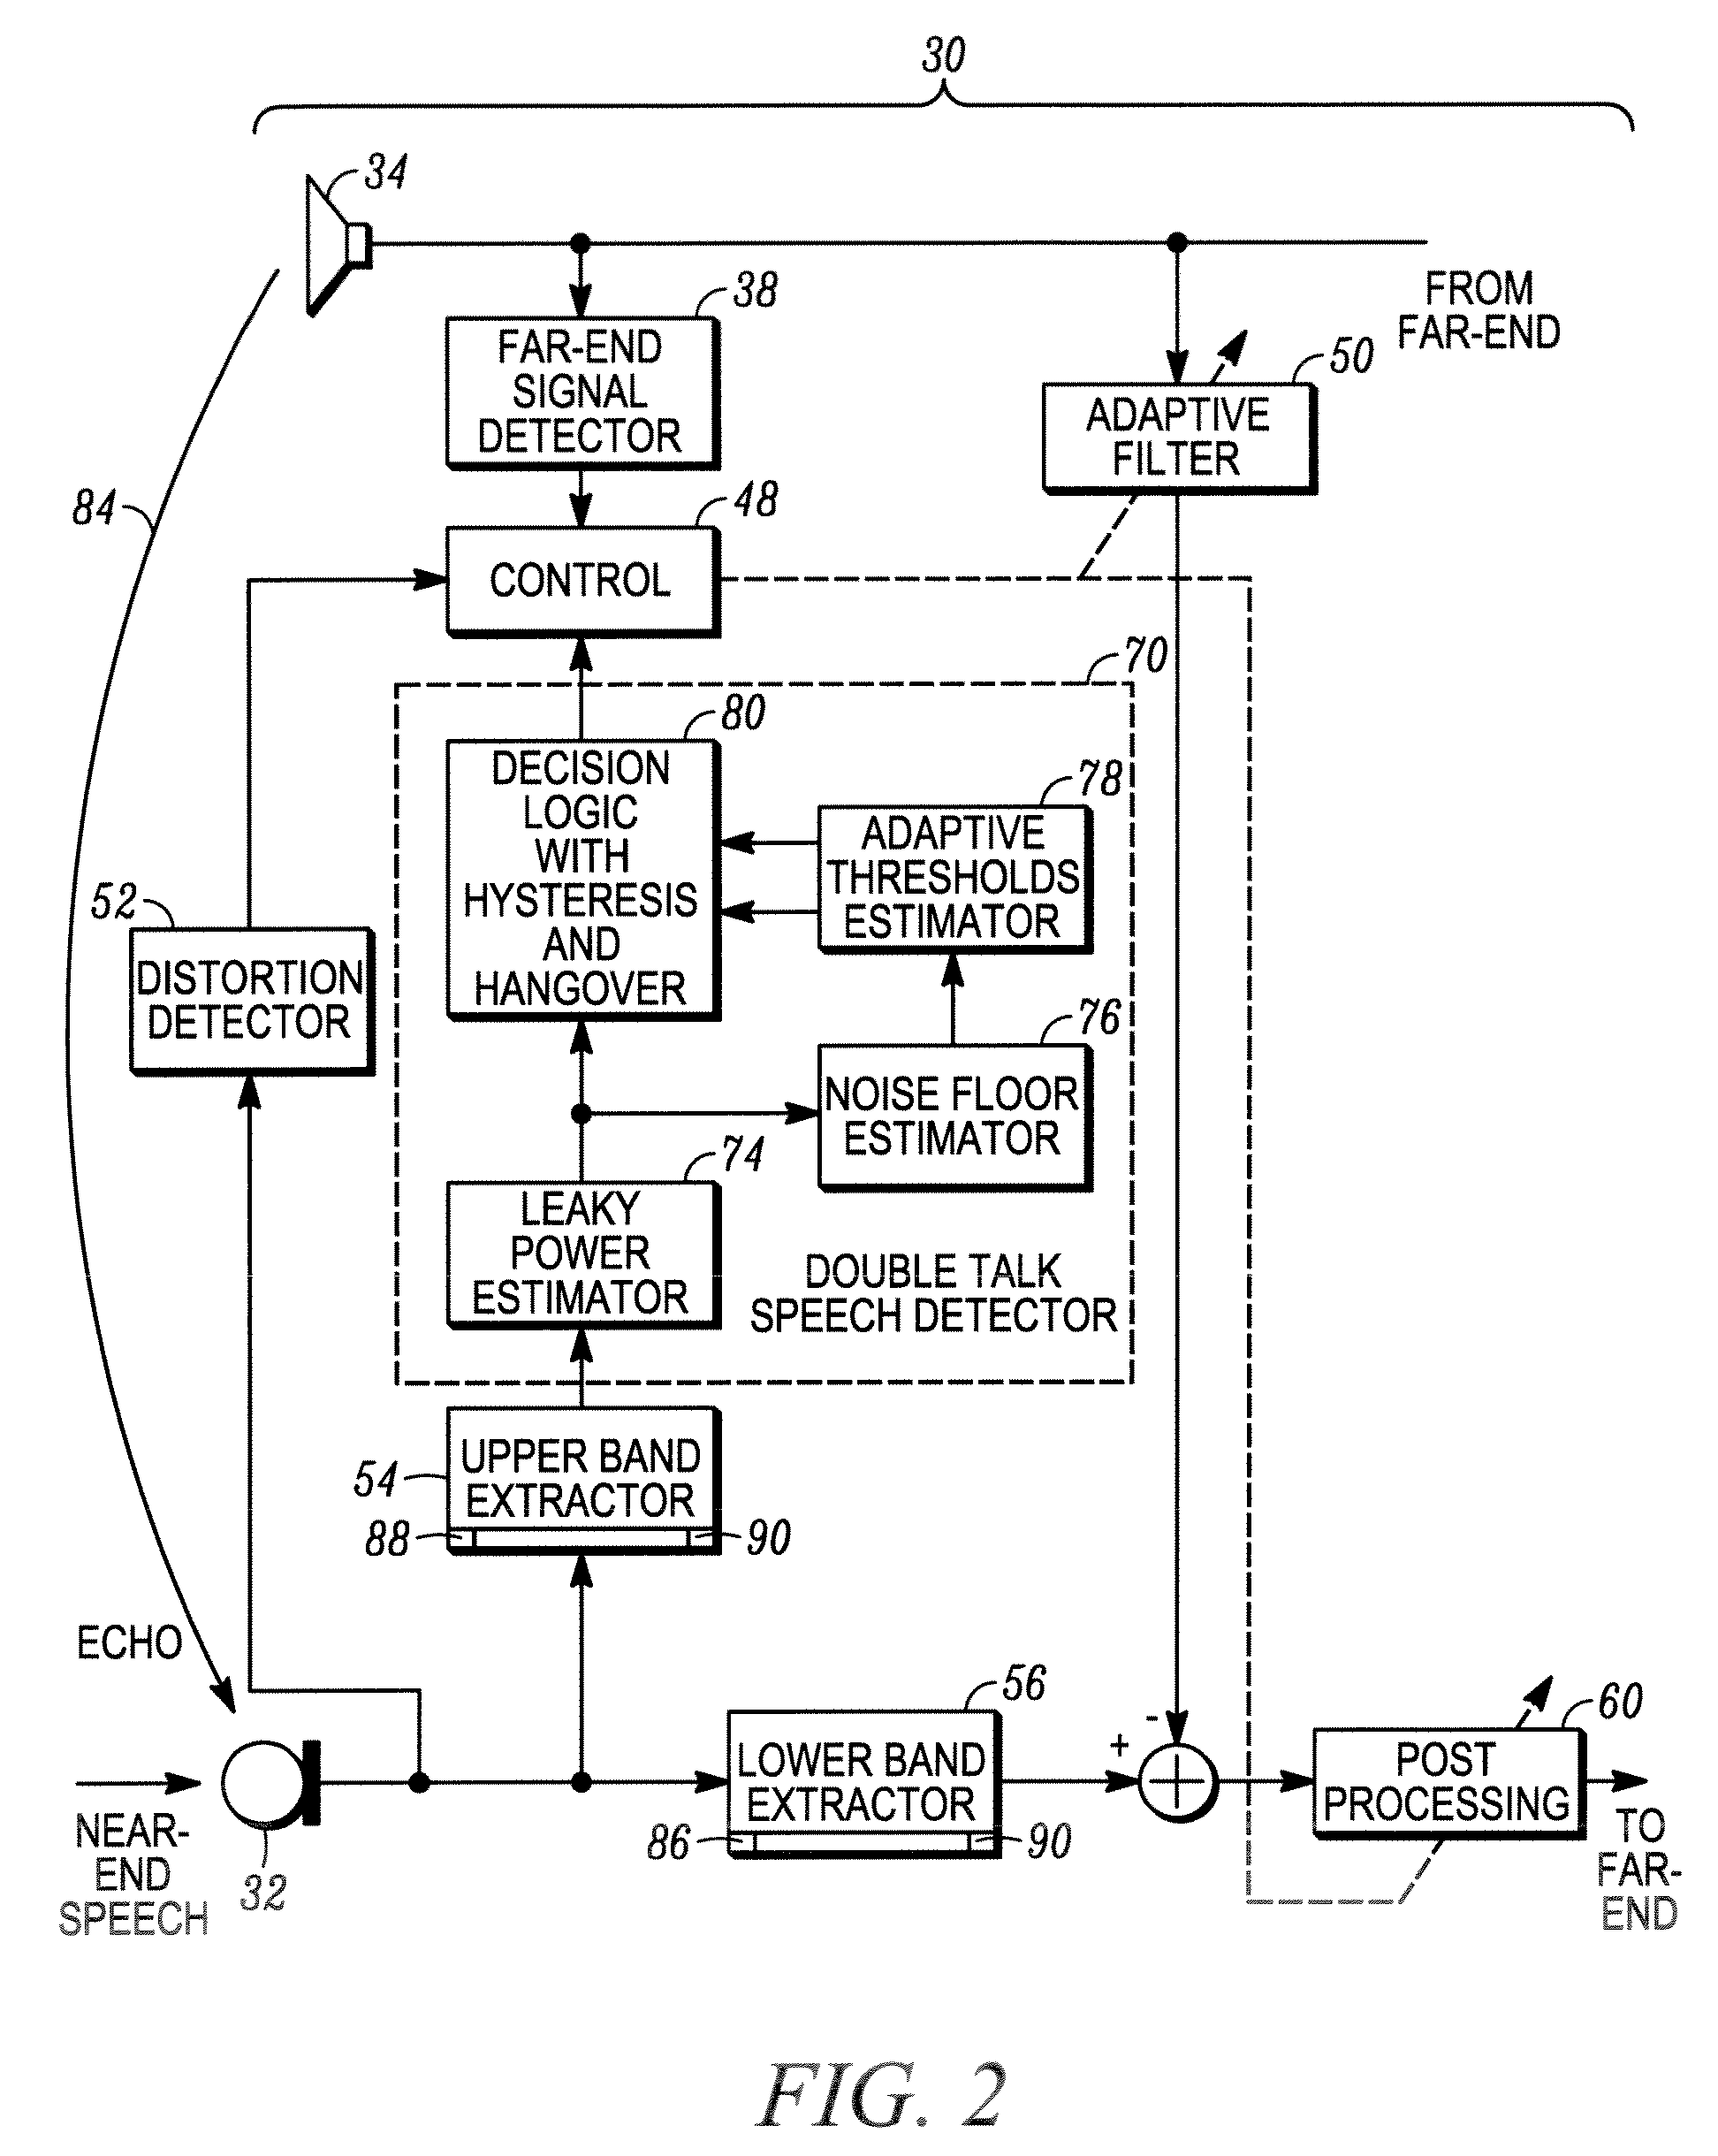 Method and apparatus for double-talk detection in a hands-free communication system